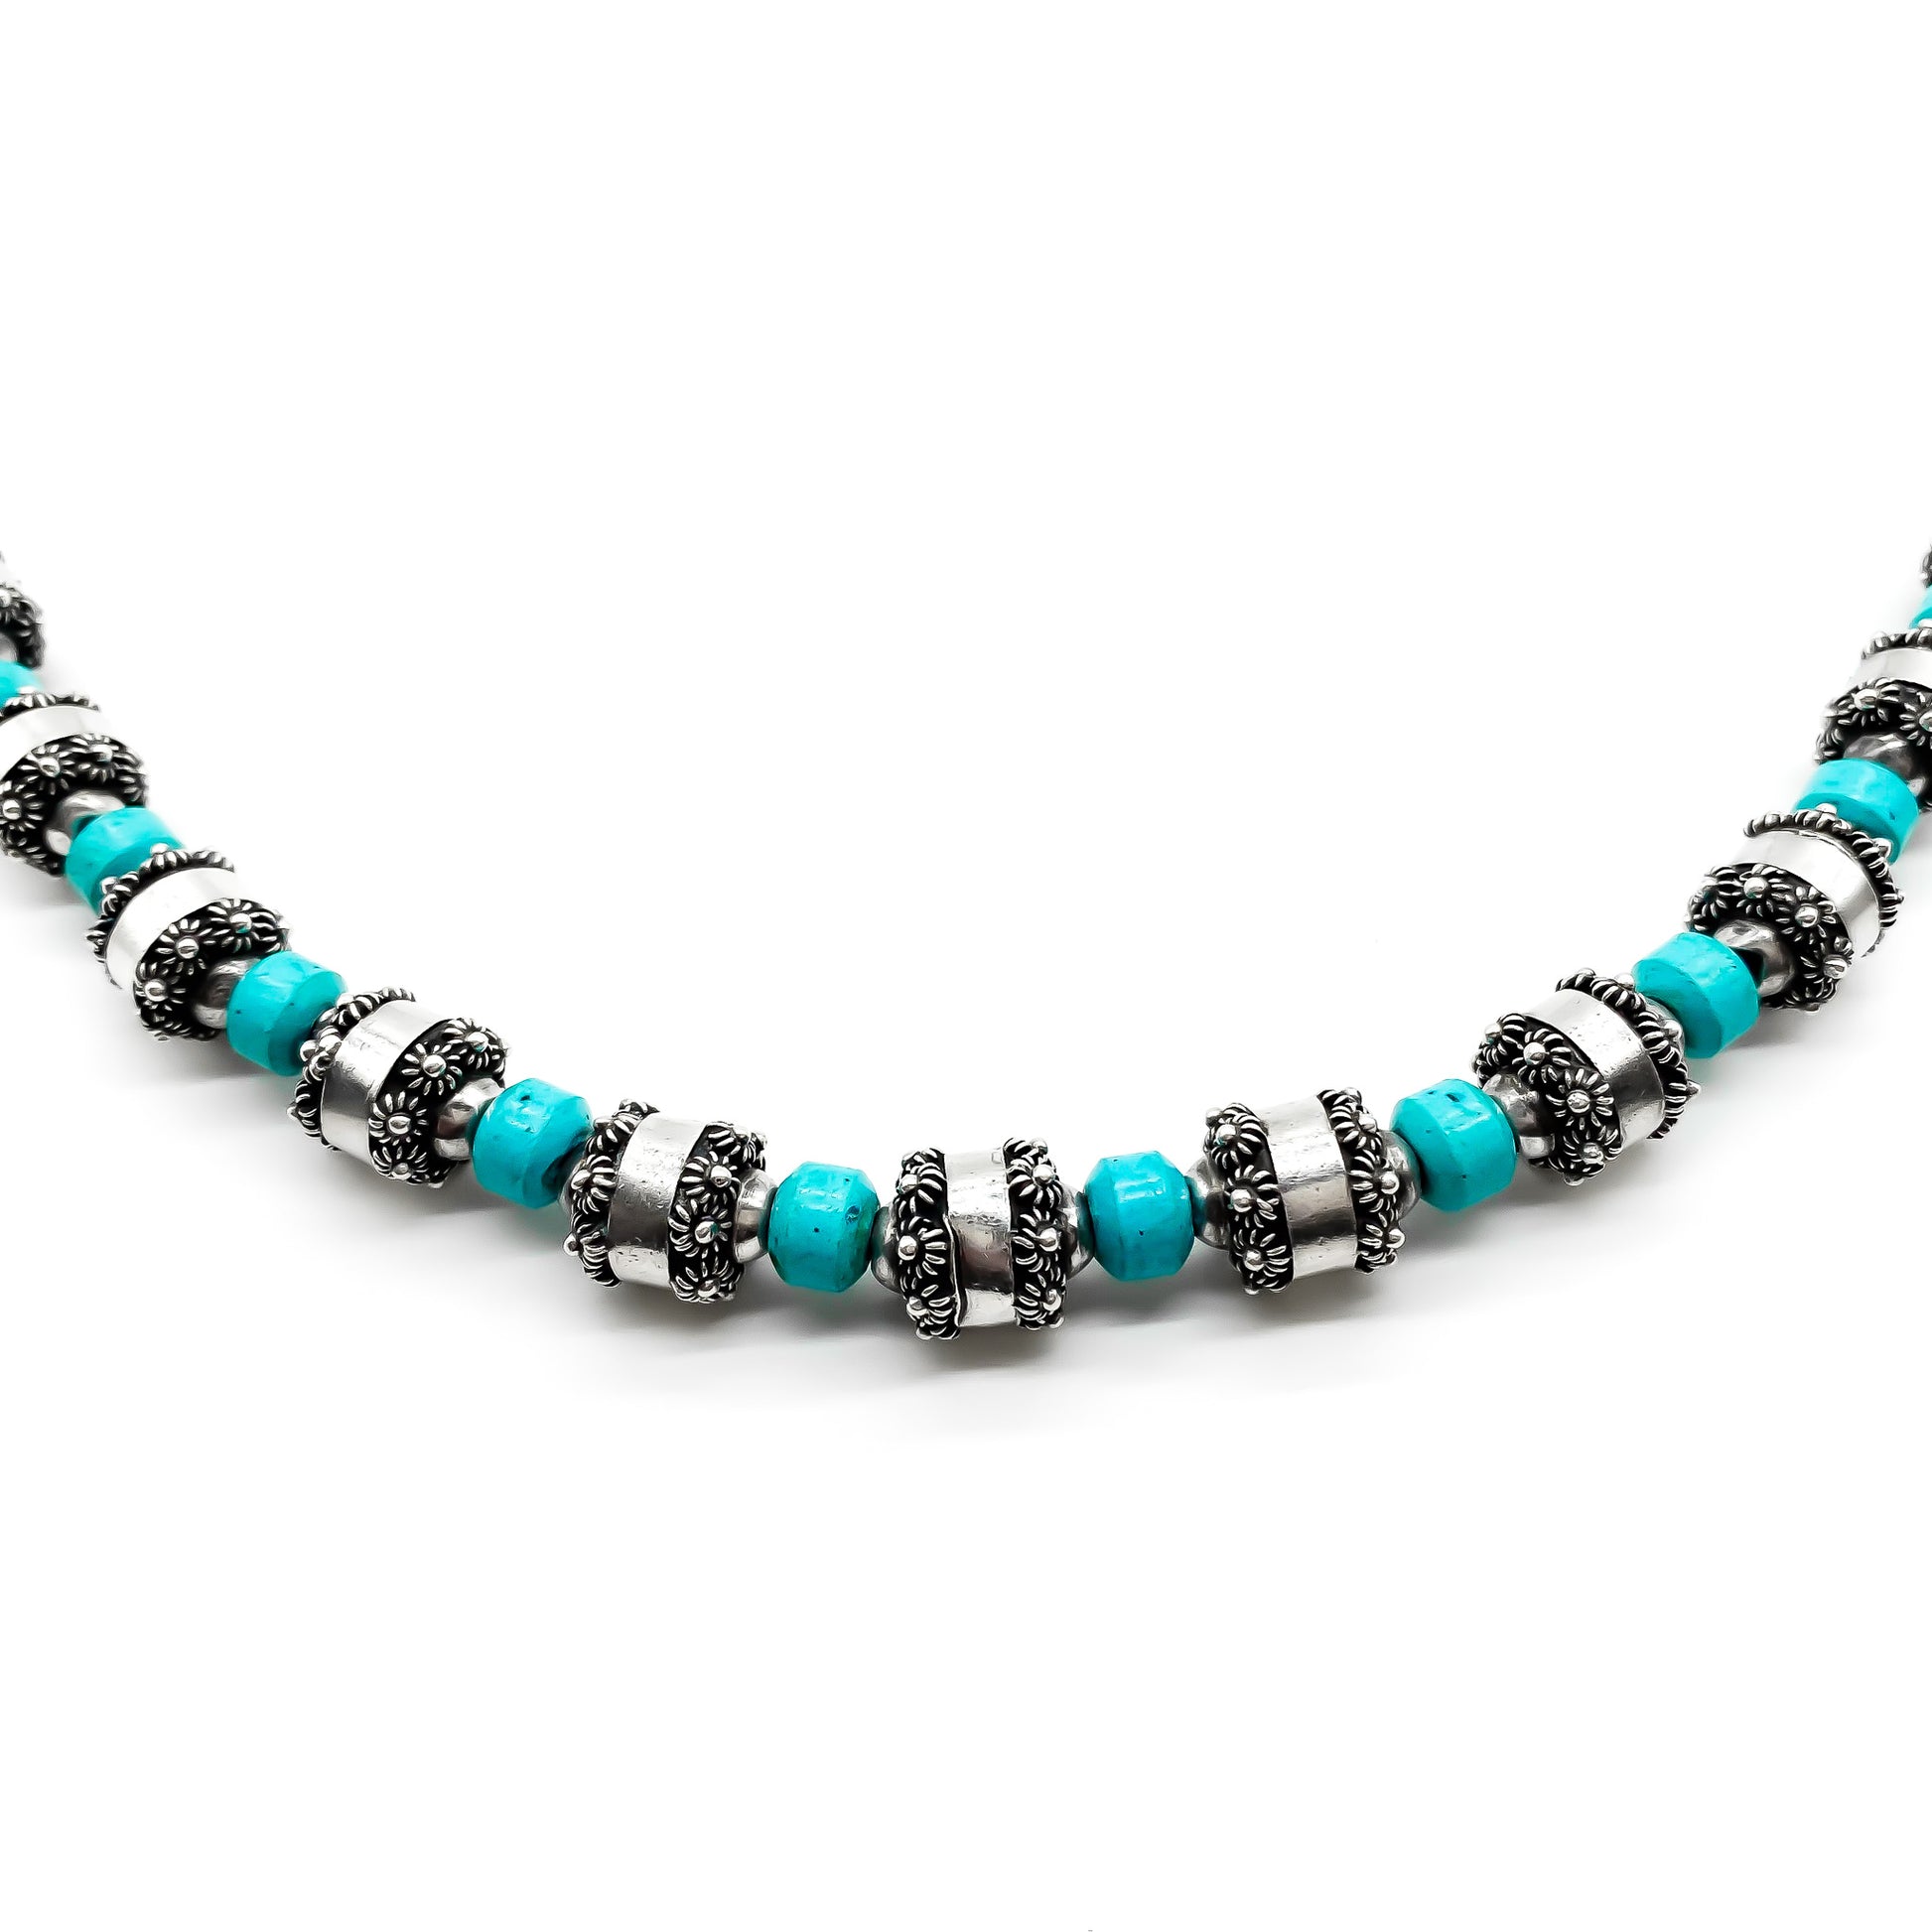 Stunning vintage Mexican necklace with sterling silver filigree and turquoise beads. Eagle Hallmark (Post 1947)